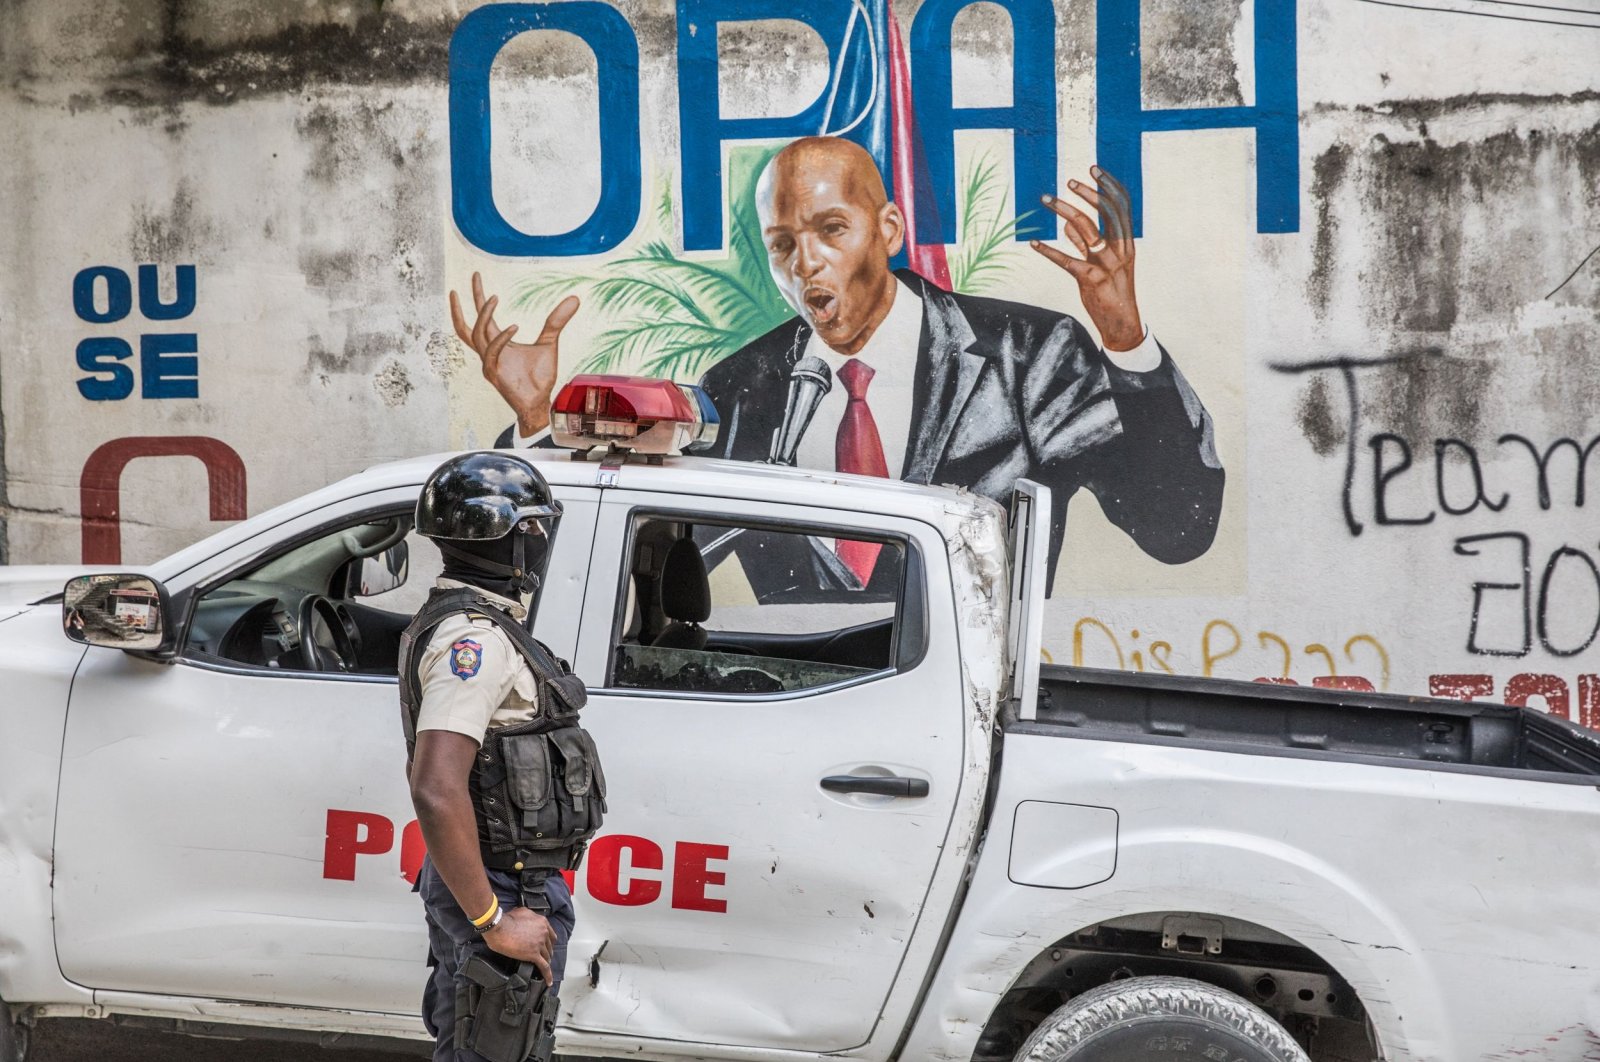 A police officer stands by a wall painted with a mural of late Haitian President Jovenel Moise after FBI agents and forensic teams conducted searches in his residence in Port-au-Prince, Haiti, July 15, 2021, July 7, 2021. (AFP Photo)